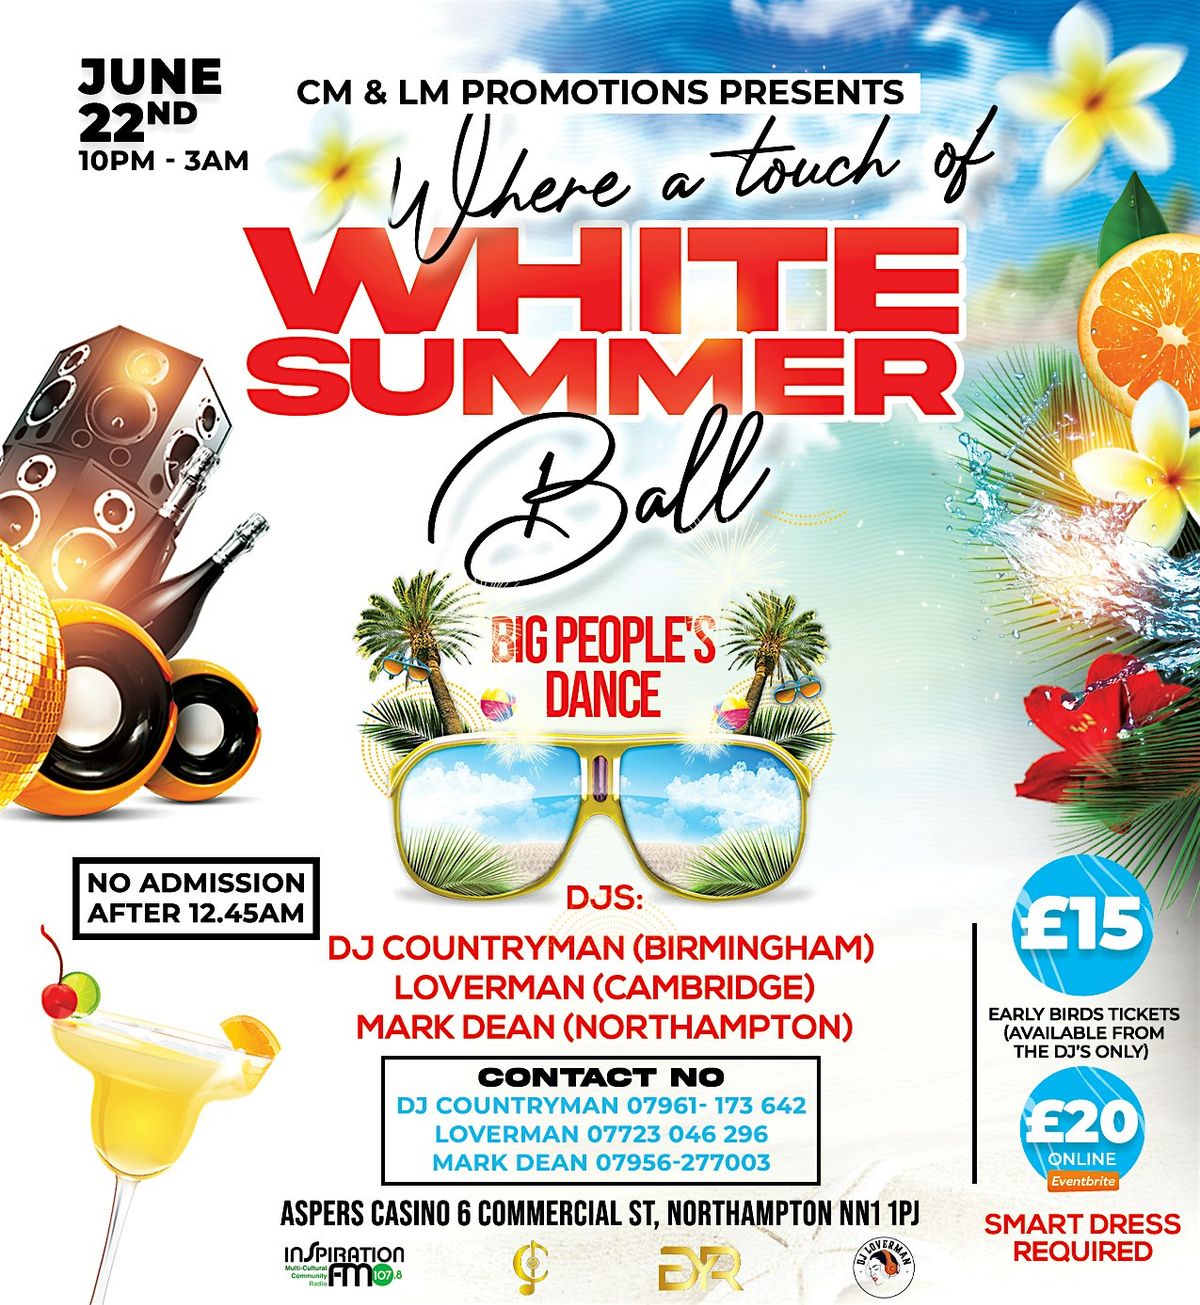 Where a touch of white summer ball